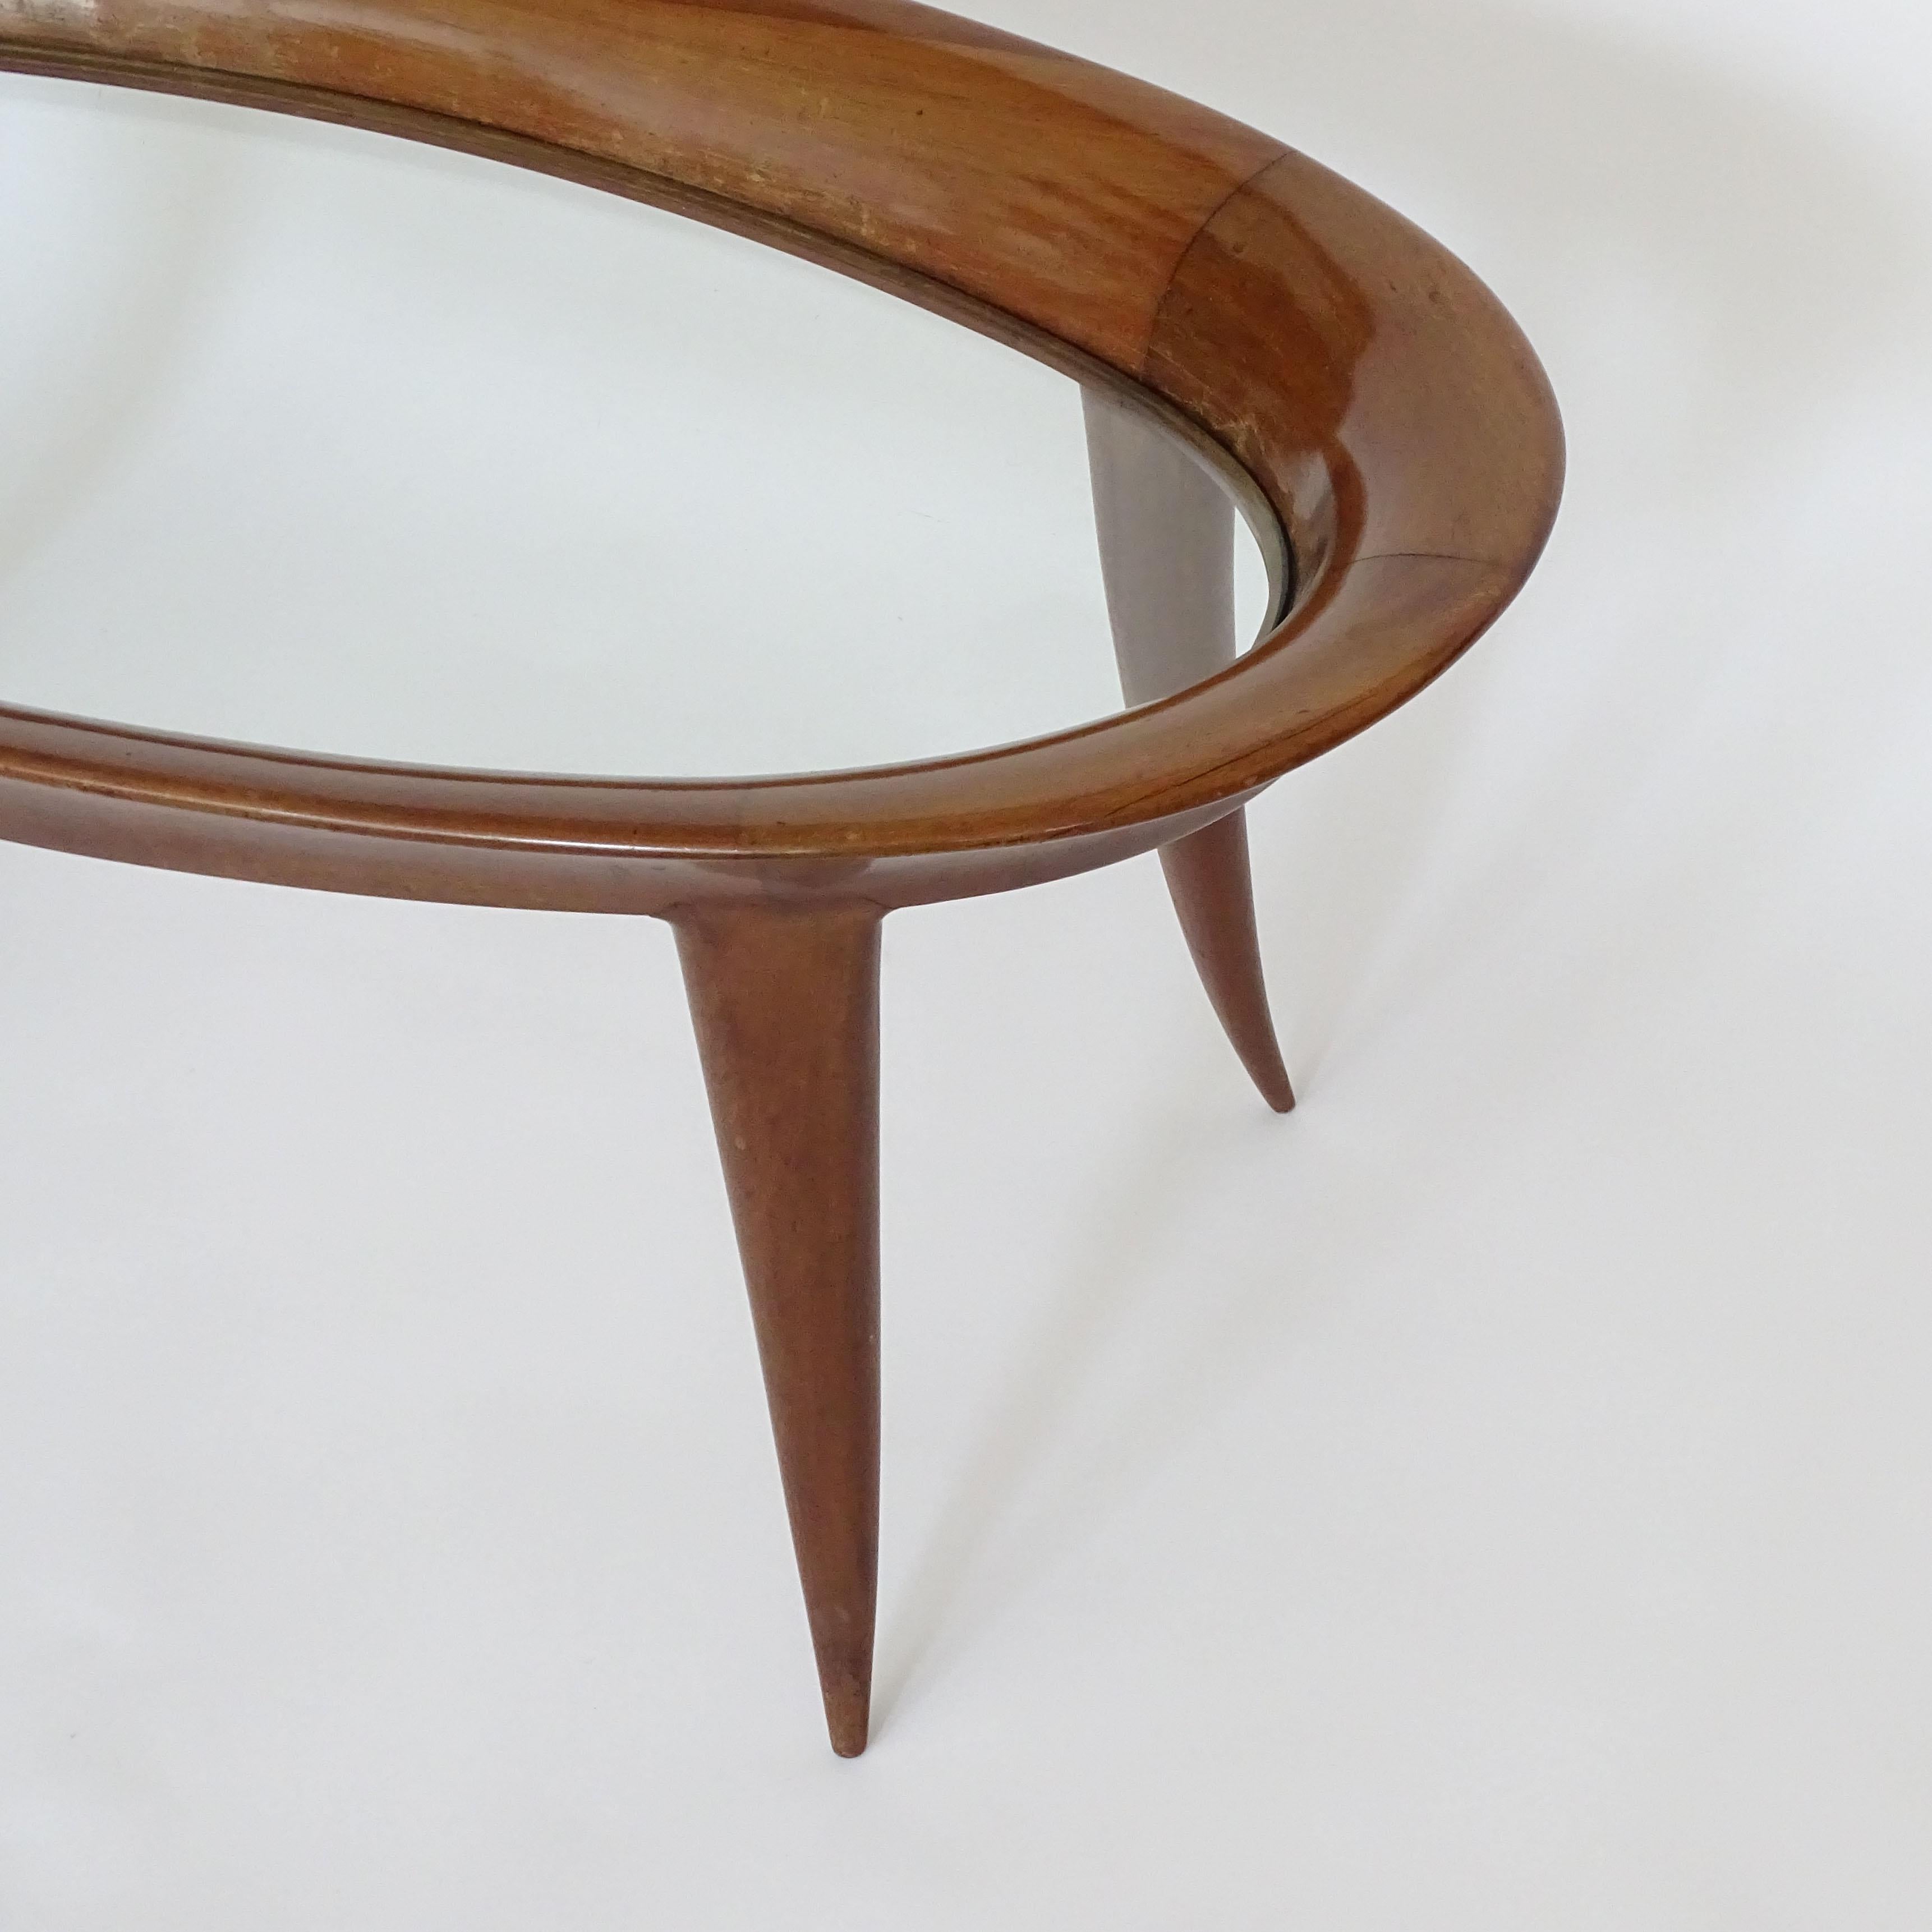 Mid-20th Century Italian 1940s Sculpted Oval Coffee Table Attributed to Fontana Arte For Sale